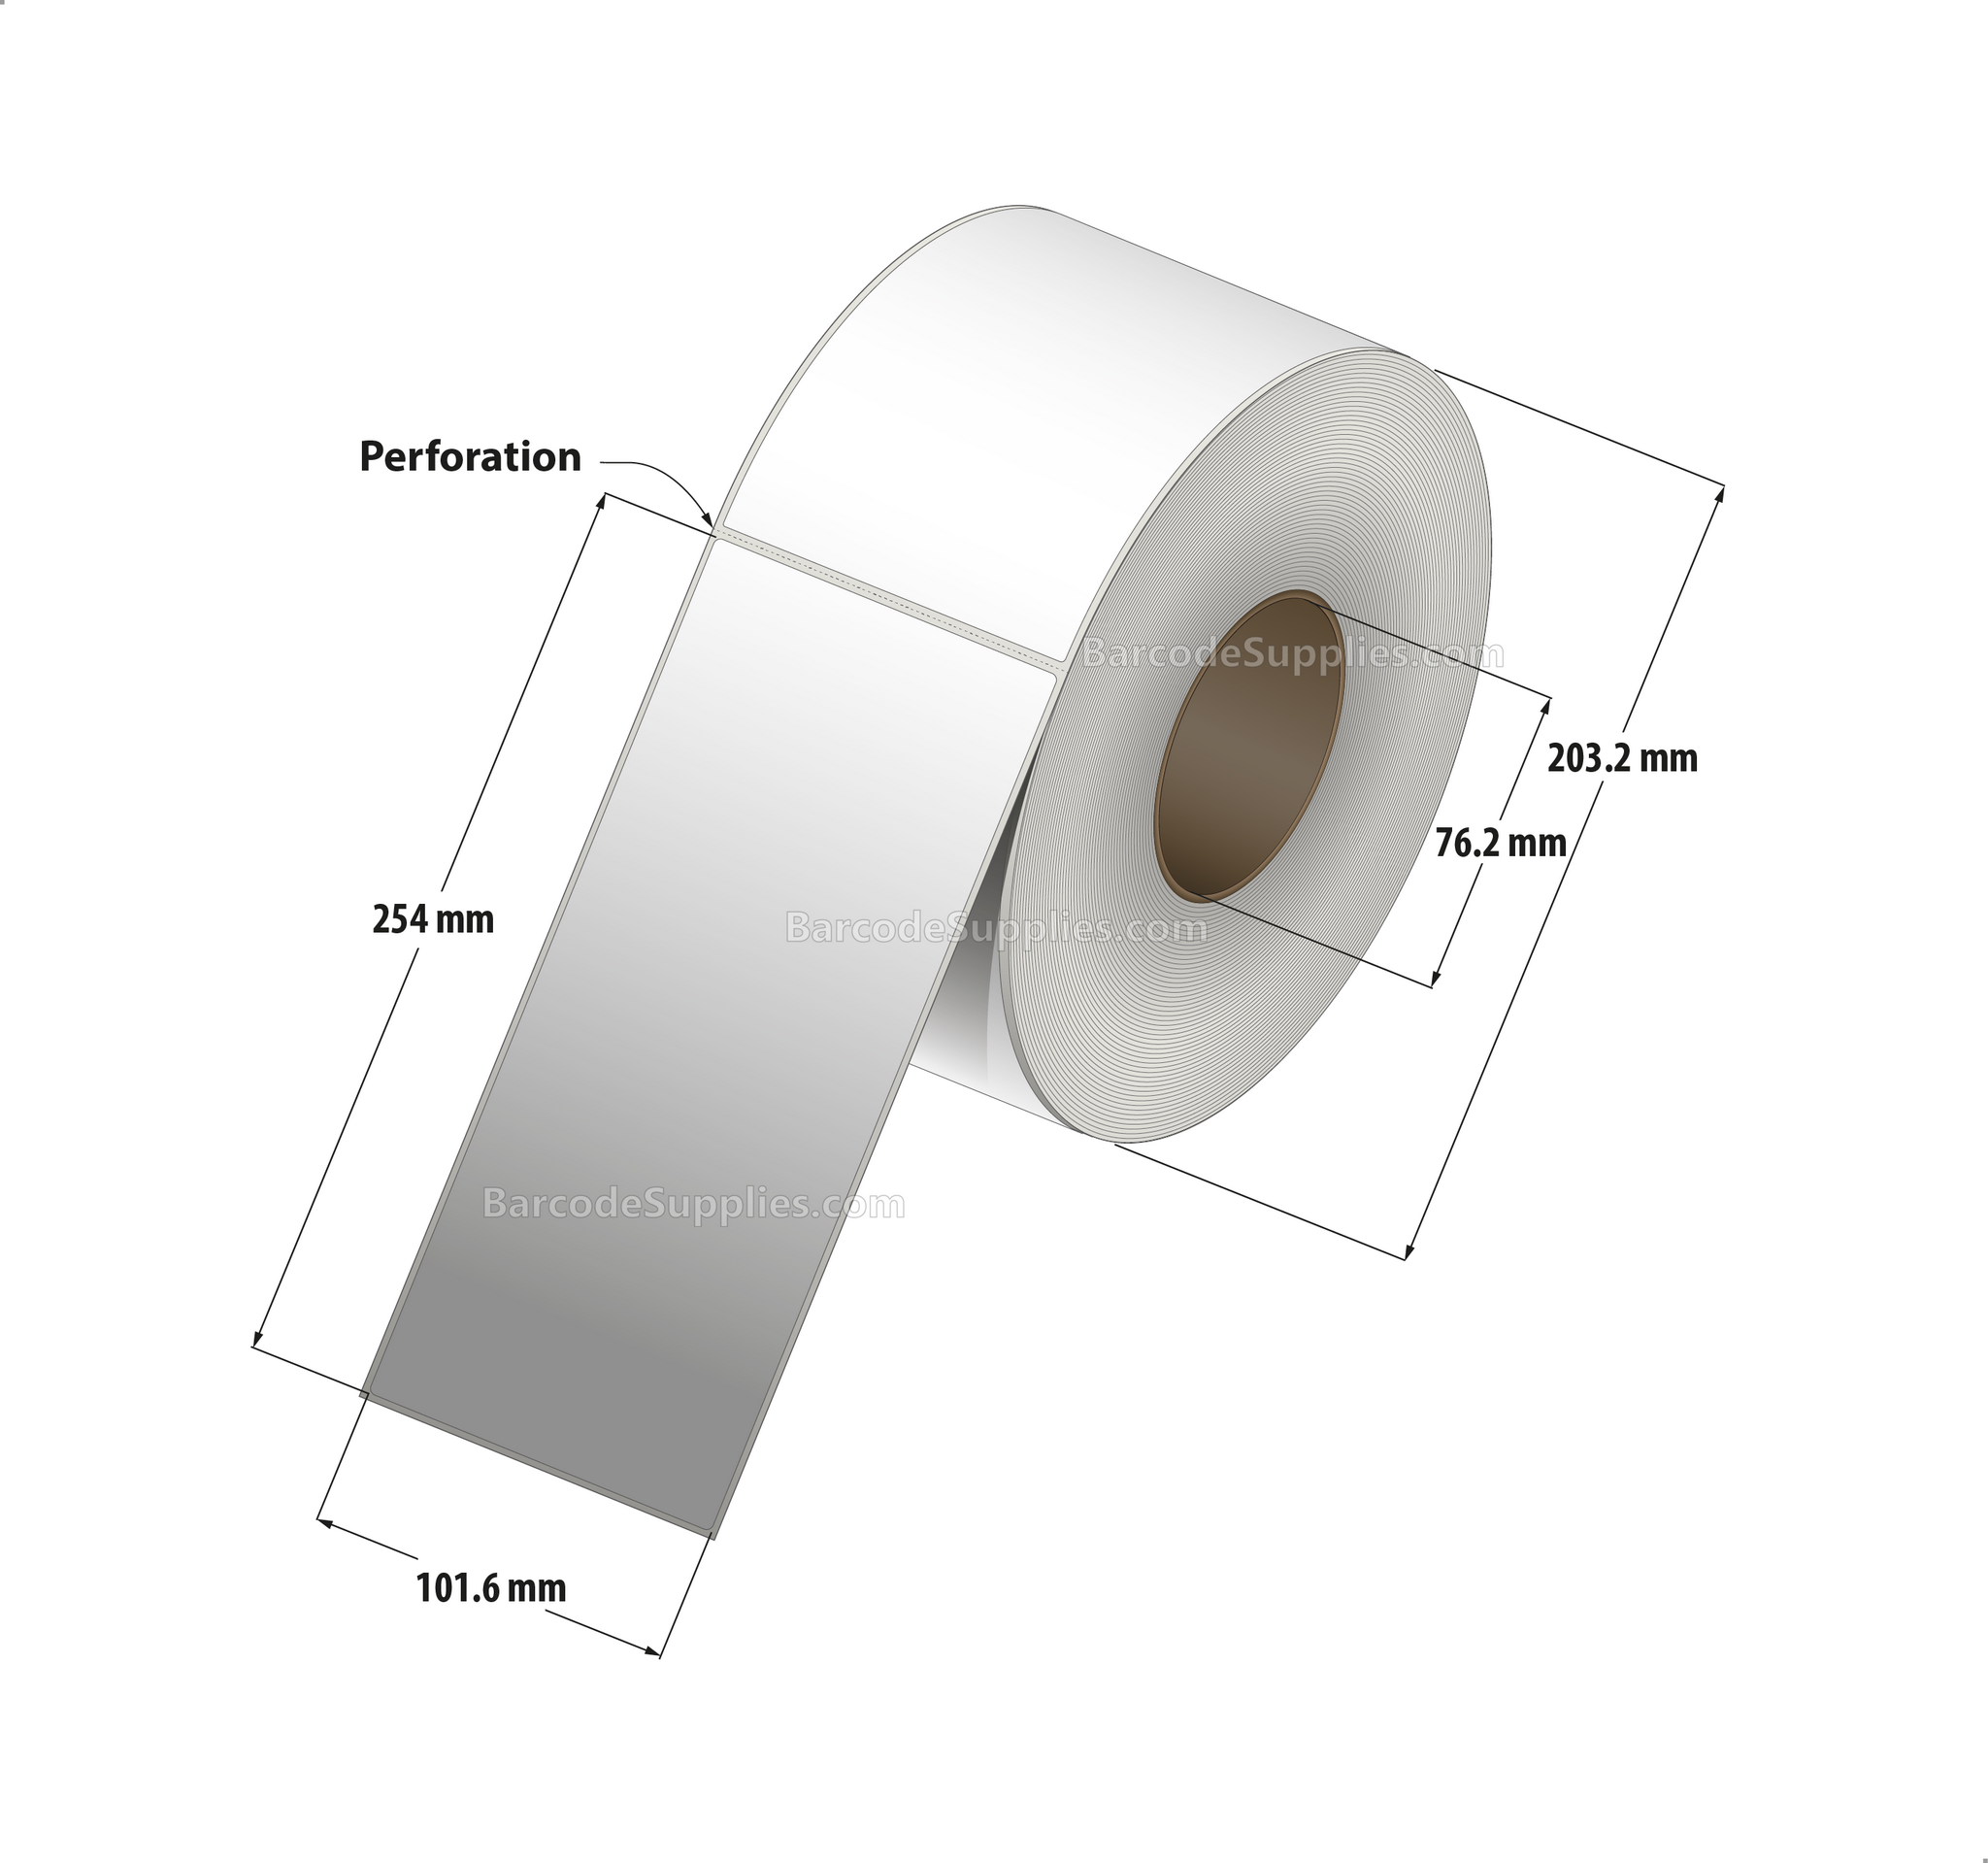 4 x 10 Thermal Transfer White Labels With Permanent Acrylic Adhesive - Perforated - 600 Labels Per Roll - Carton Of 4 Rolls - 2400 Labels Total - MPN: TH410-1P